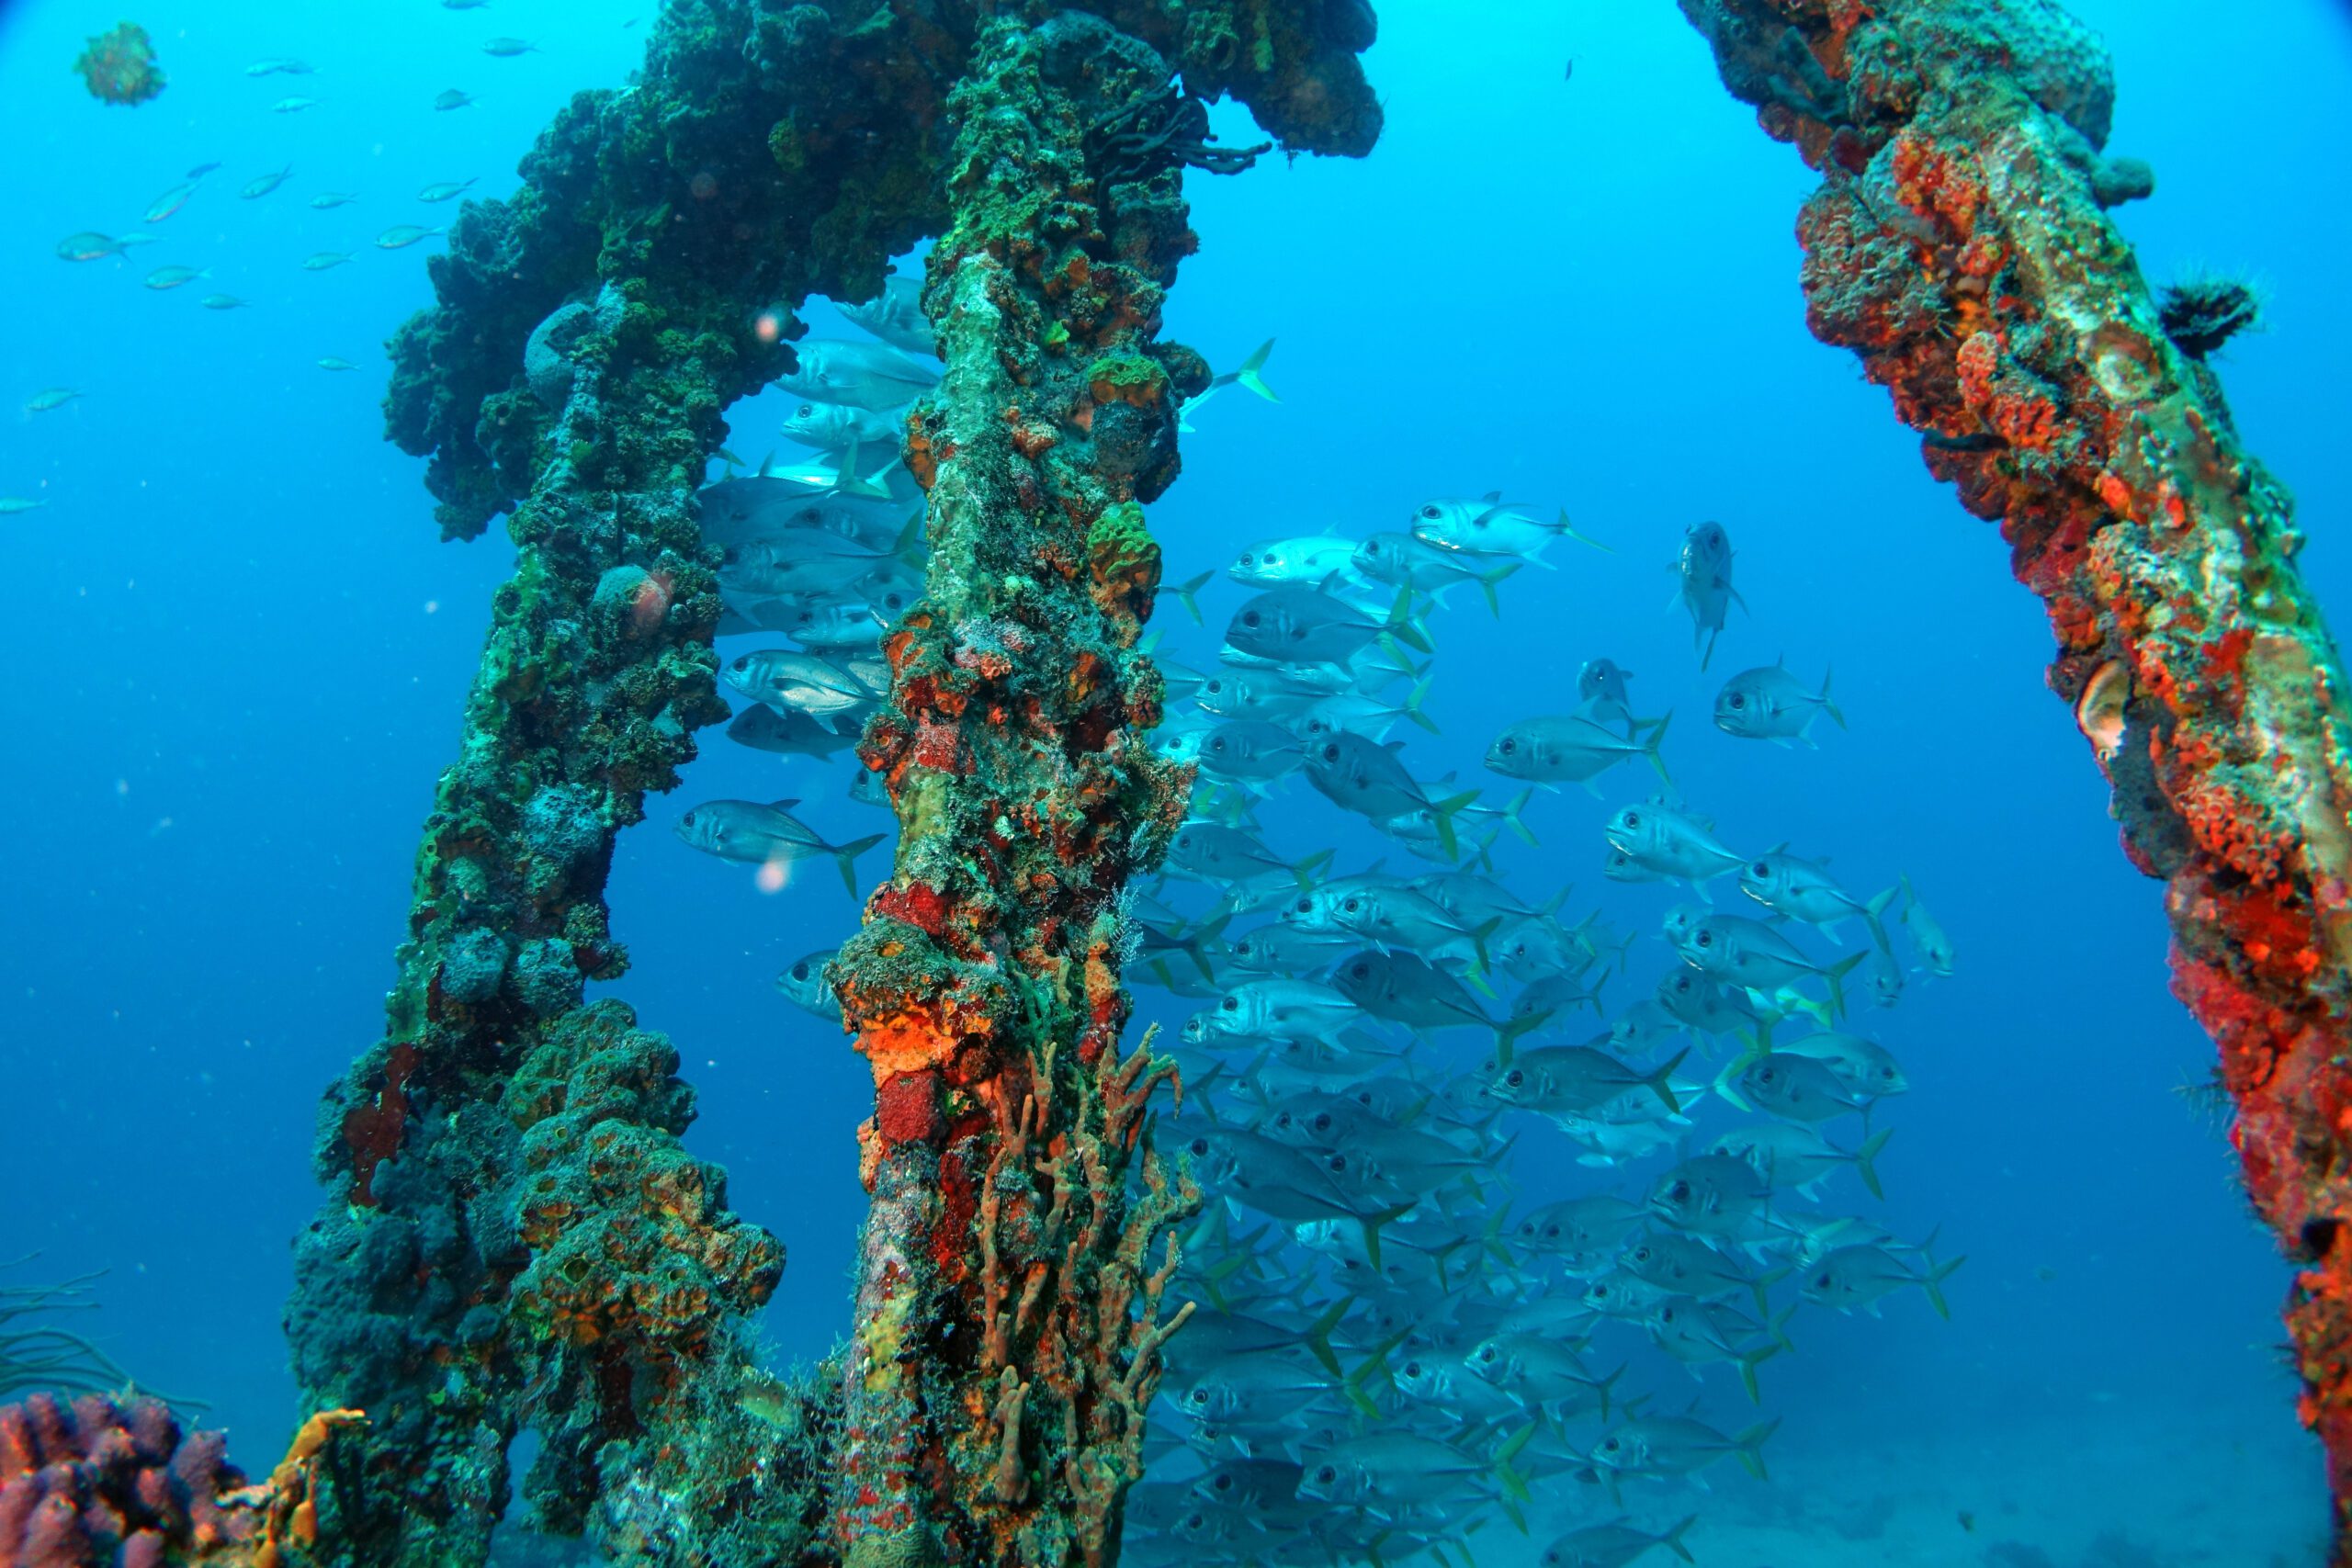 Fish swimming around coral growing on the sunken RMS Rhone in the BVI